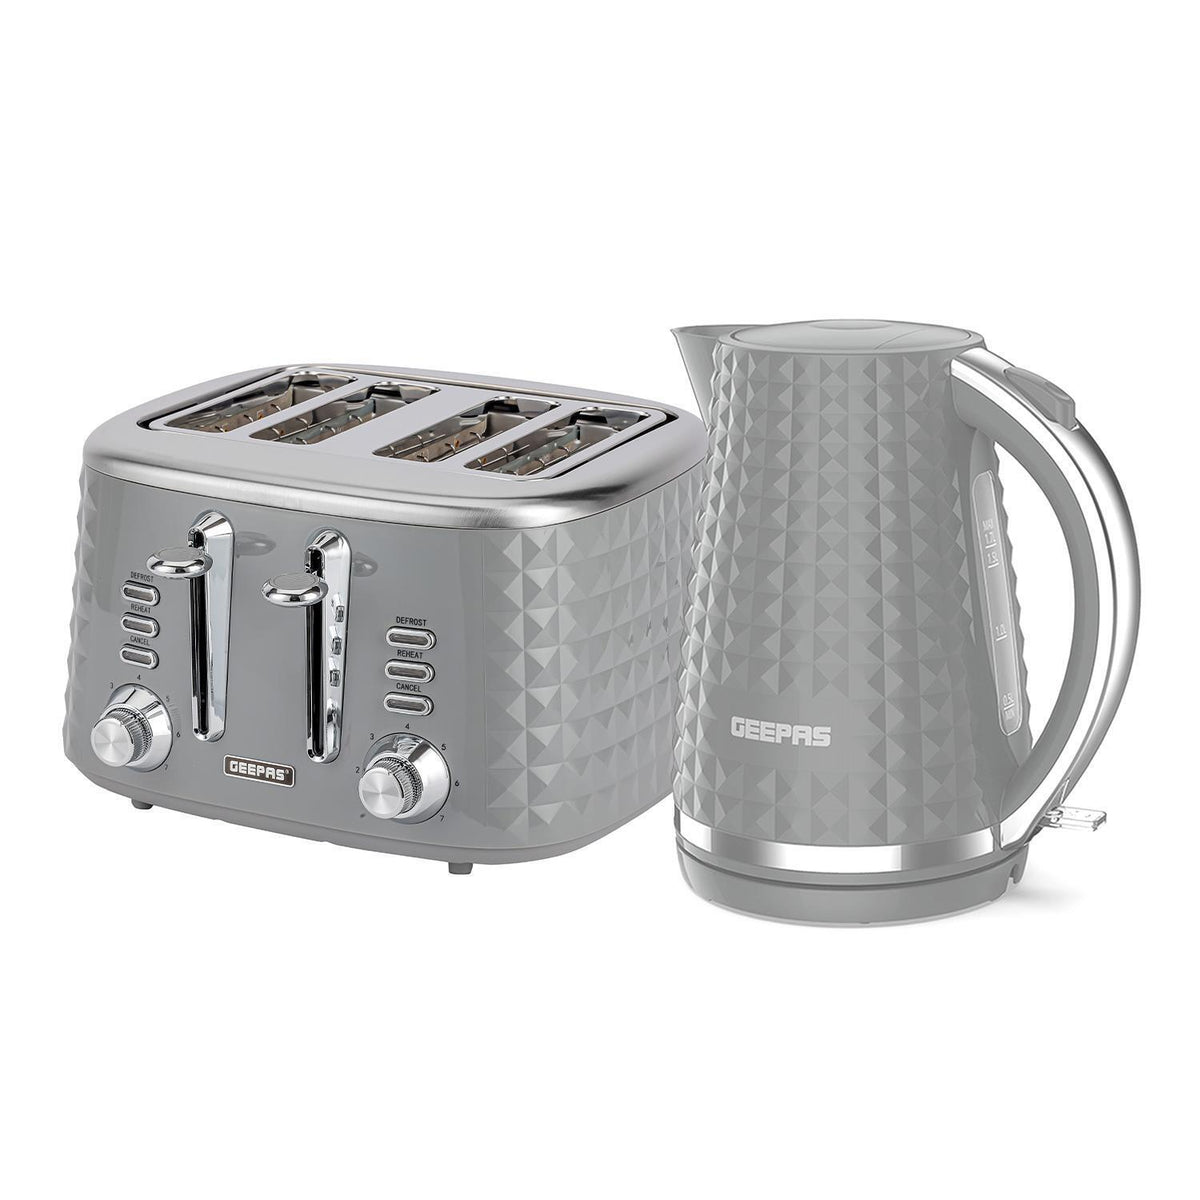 2200W 1.7L Rapid Boil Kettle and Toaster Set In Grey